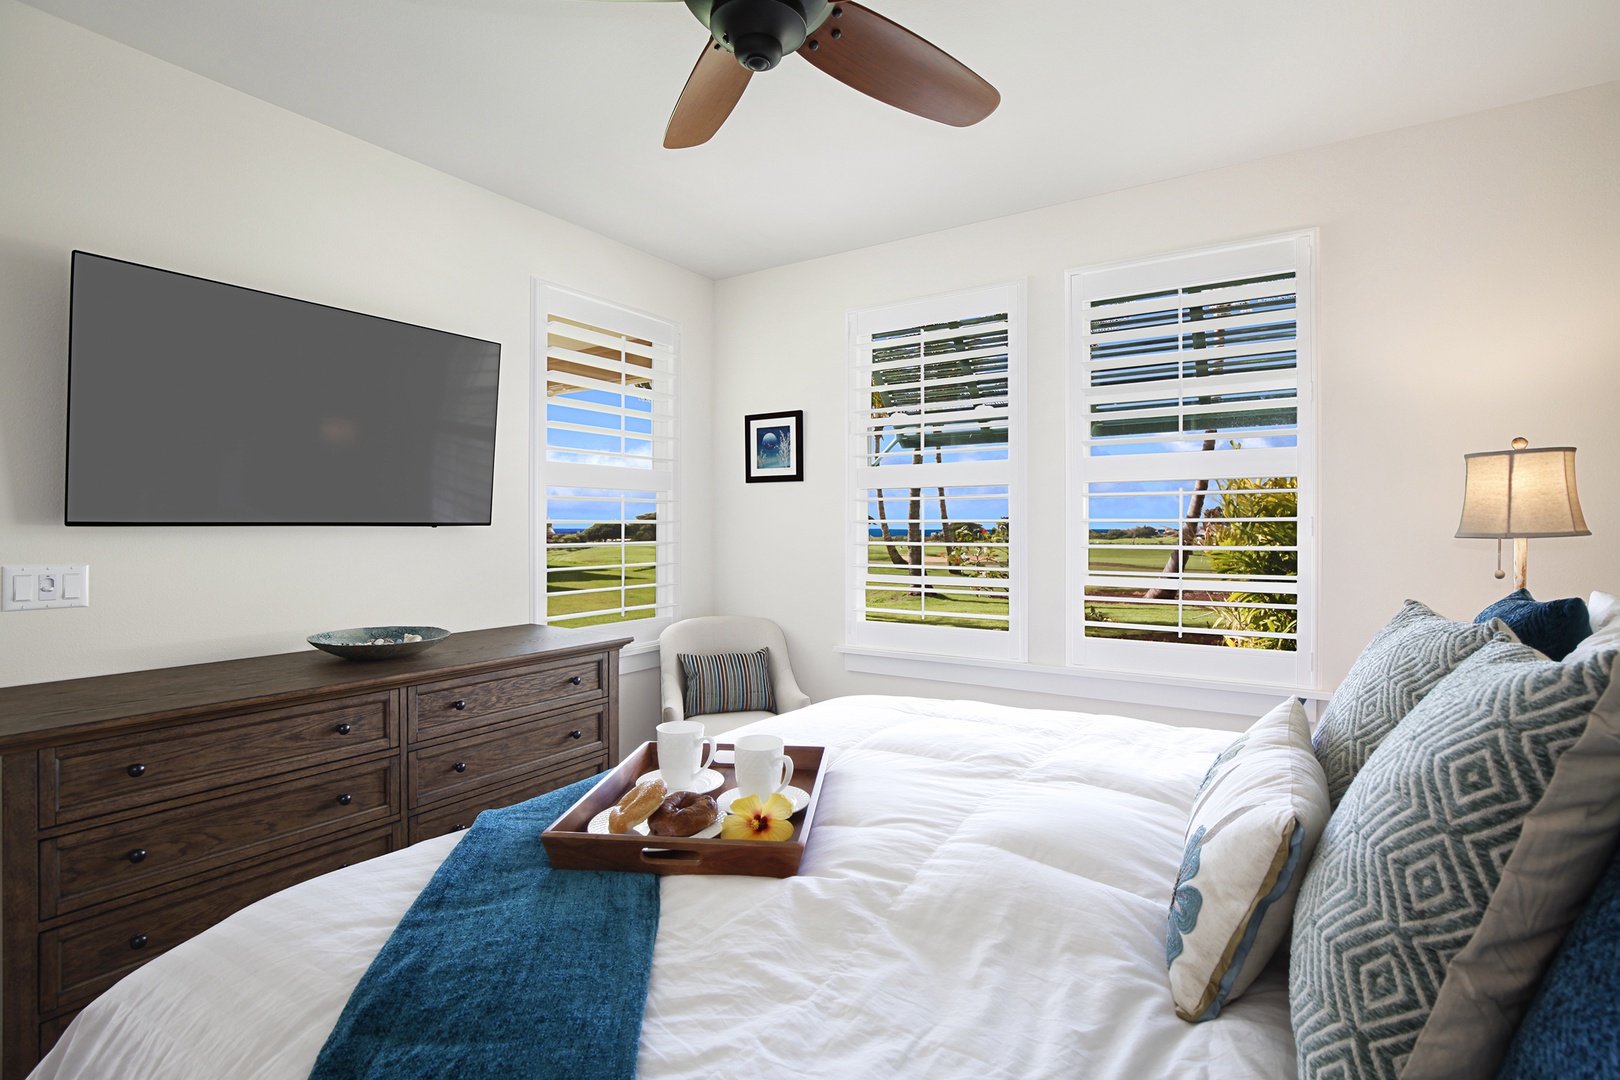 Koloa Vacation Rentals, Pili Mai 8D - Primary Bedroom with ocean views